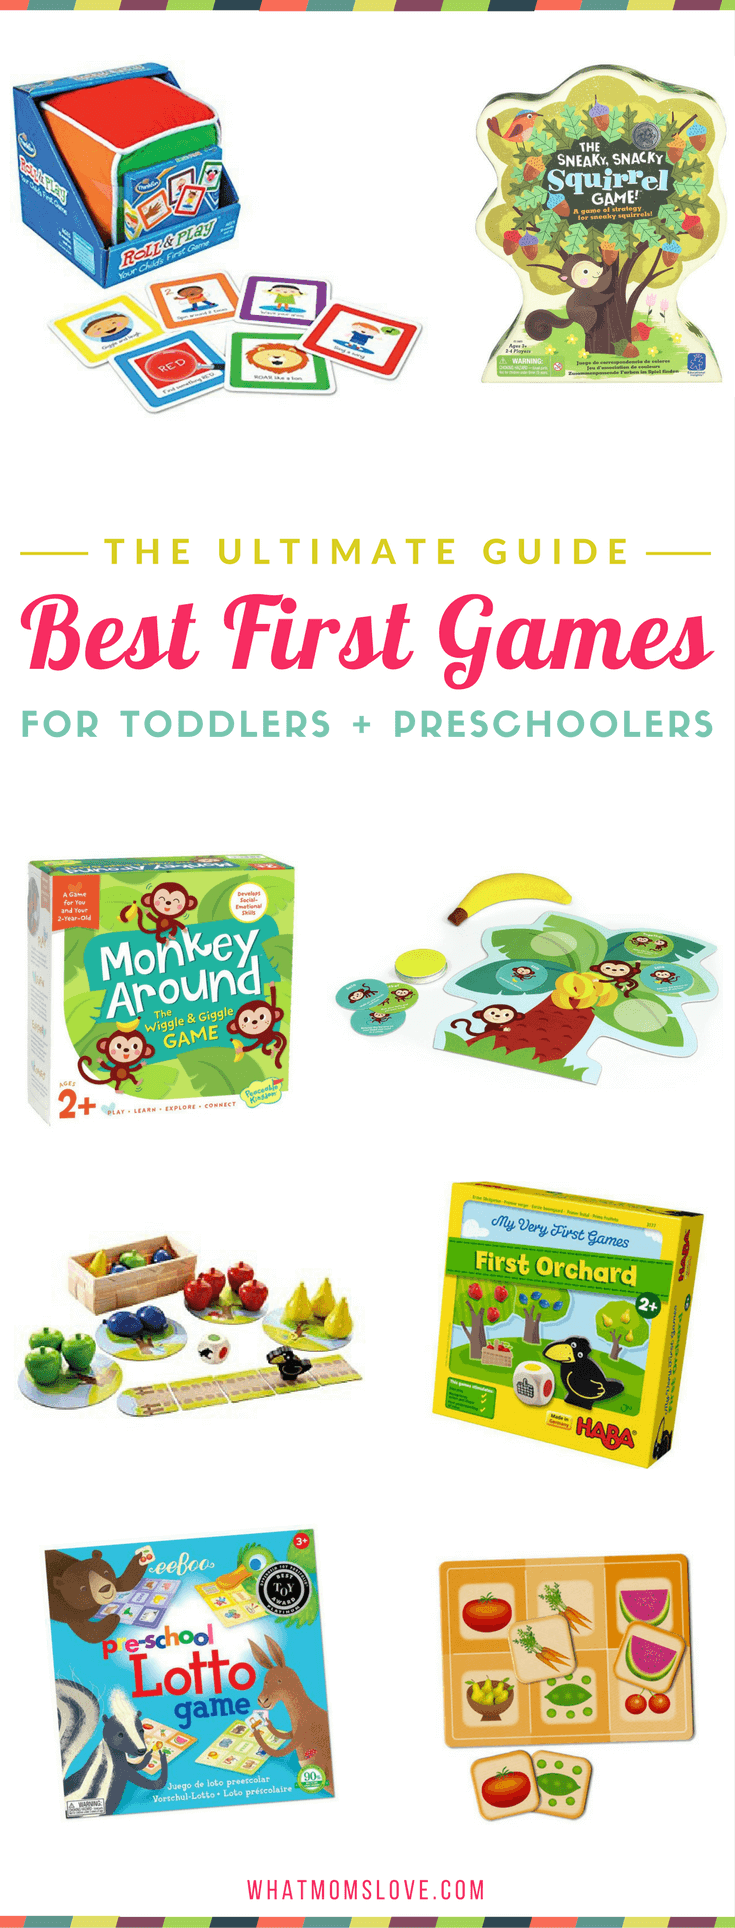 good board games for 3 year olds